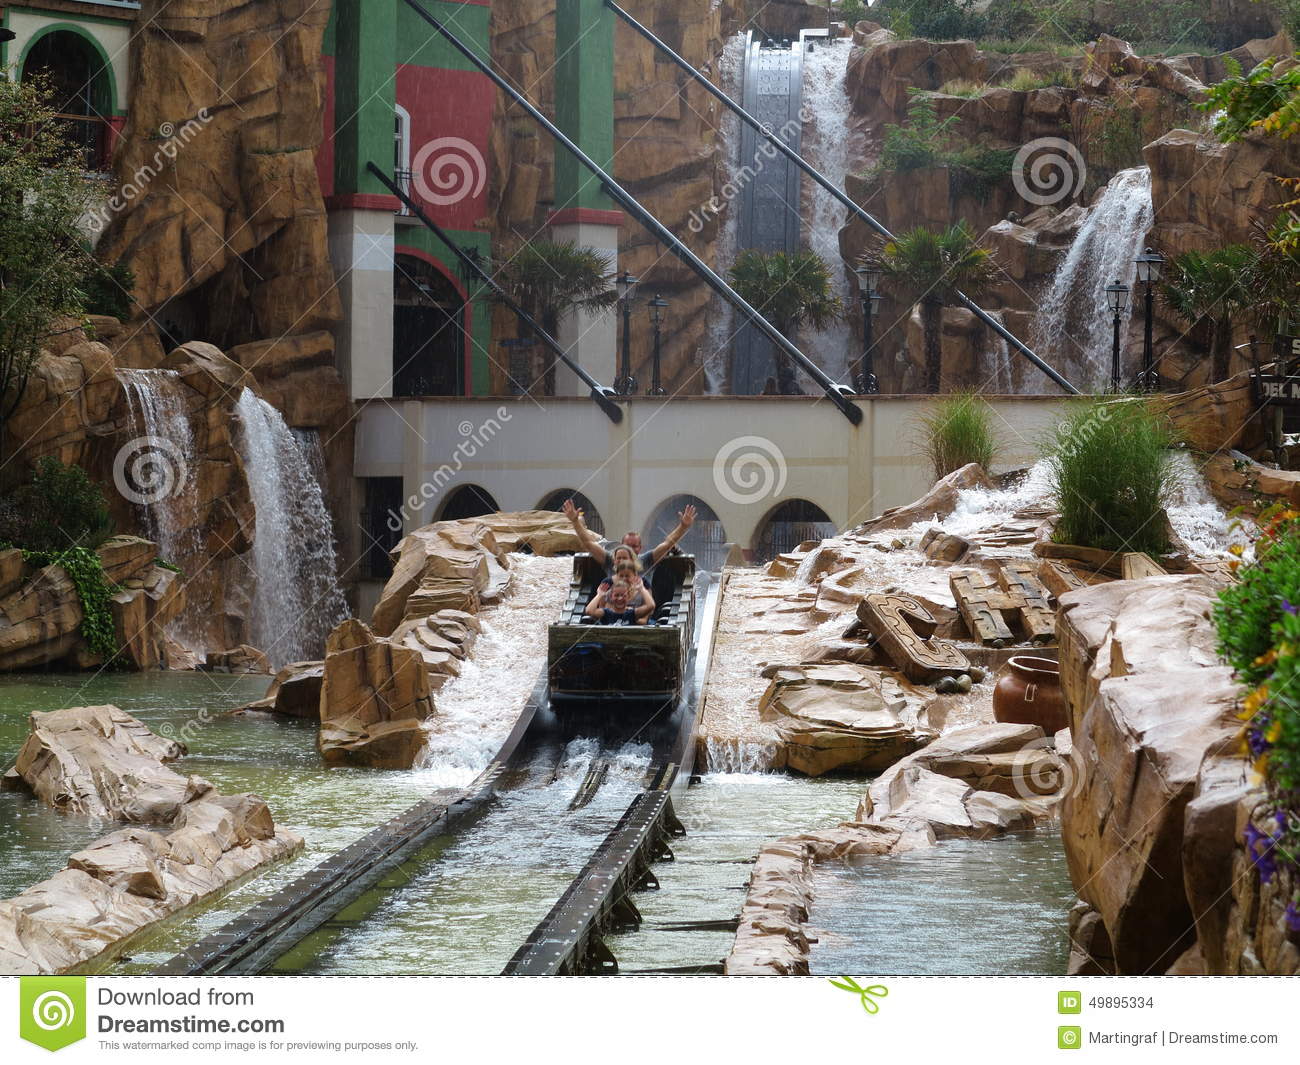 Log Flume Ride Family Fun In Mexican Landscape Editorial Stock Image